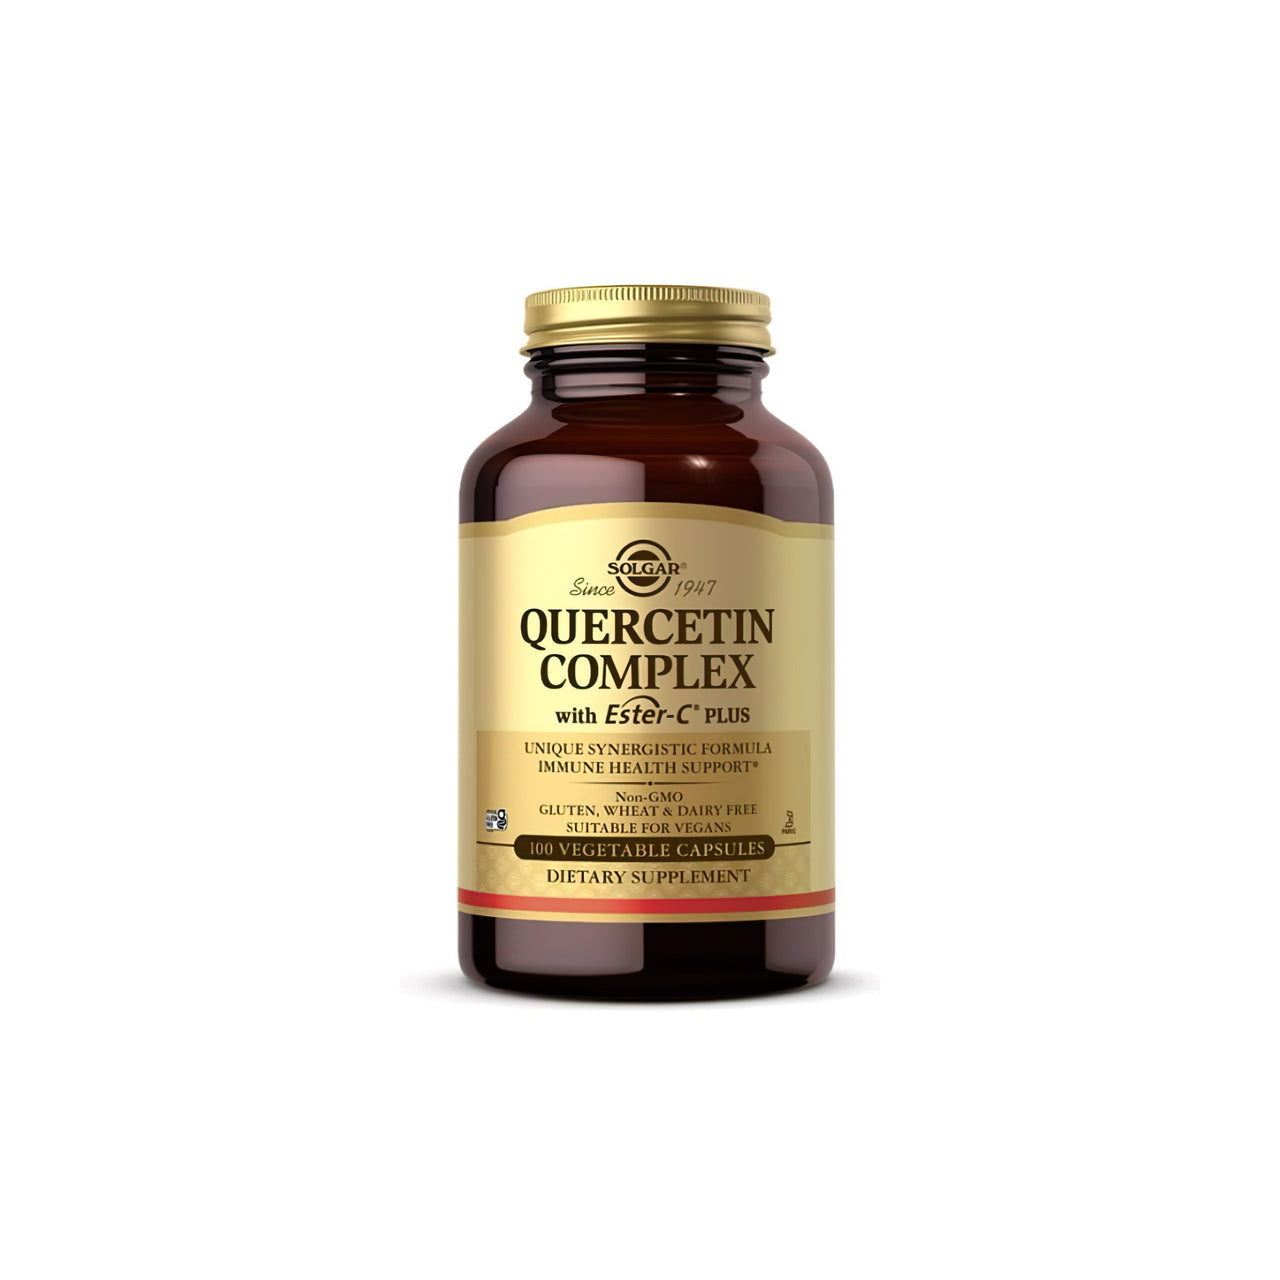 Solgar's Quercetin Complex with Ester-C Plus vegetable capsules is a powerful supplement that supports immune health. Packed with the goodness of vitamin C, each Solgar bottle contains 60 capsules to promote overall well-being.